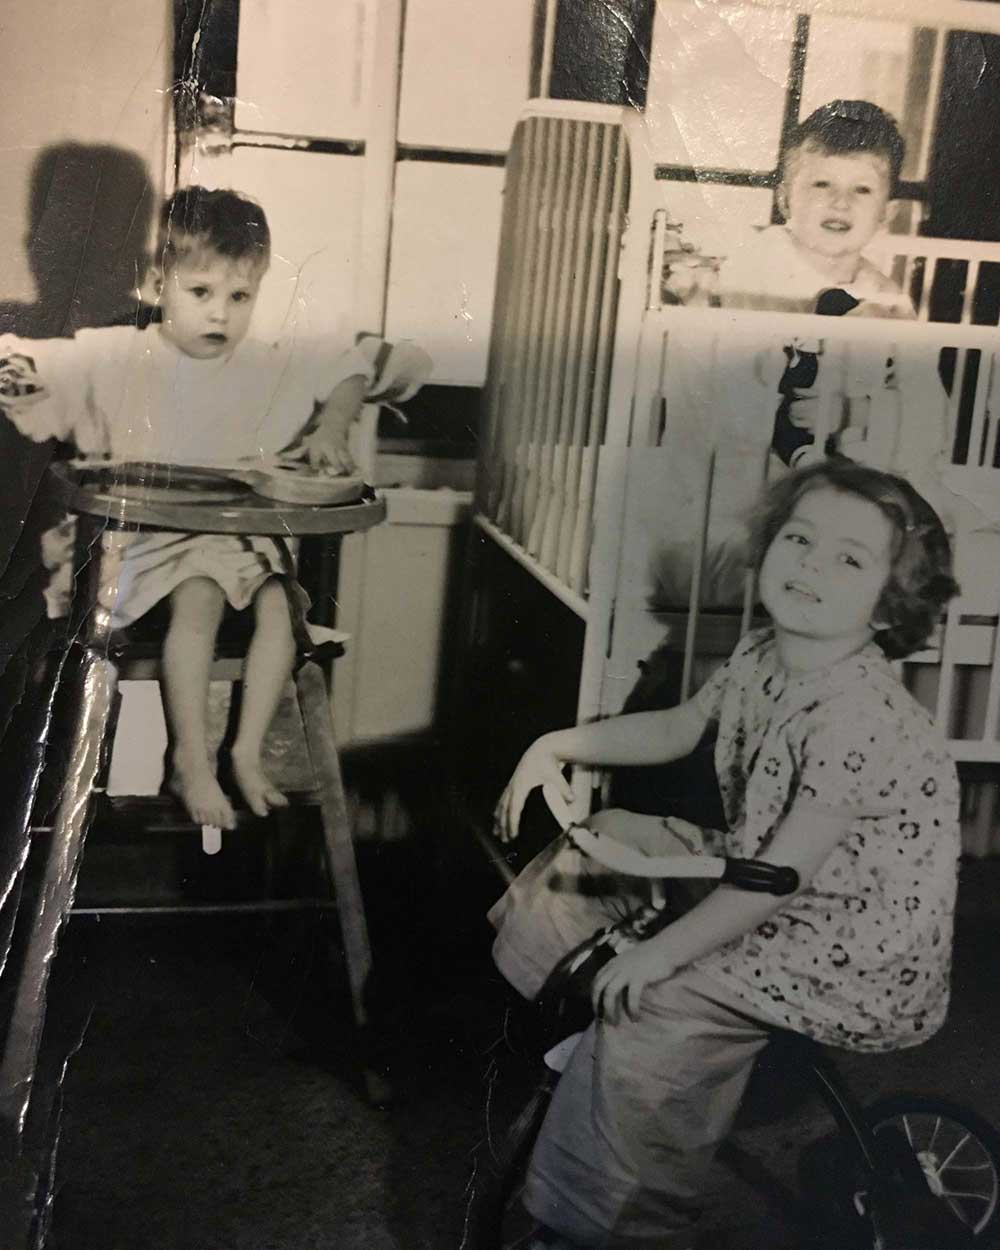 Marny Eulberg (bottom right) sits on a tricycle during her hospital stay for polio infection in 1950. She recovered, became a physician, and ran one of the first dedicated PPS clinics in the U.S. Credit: Marny Eulberg